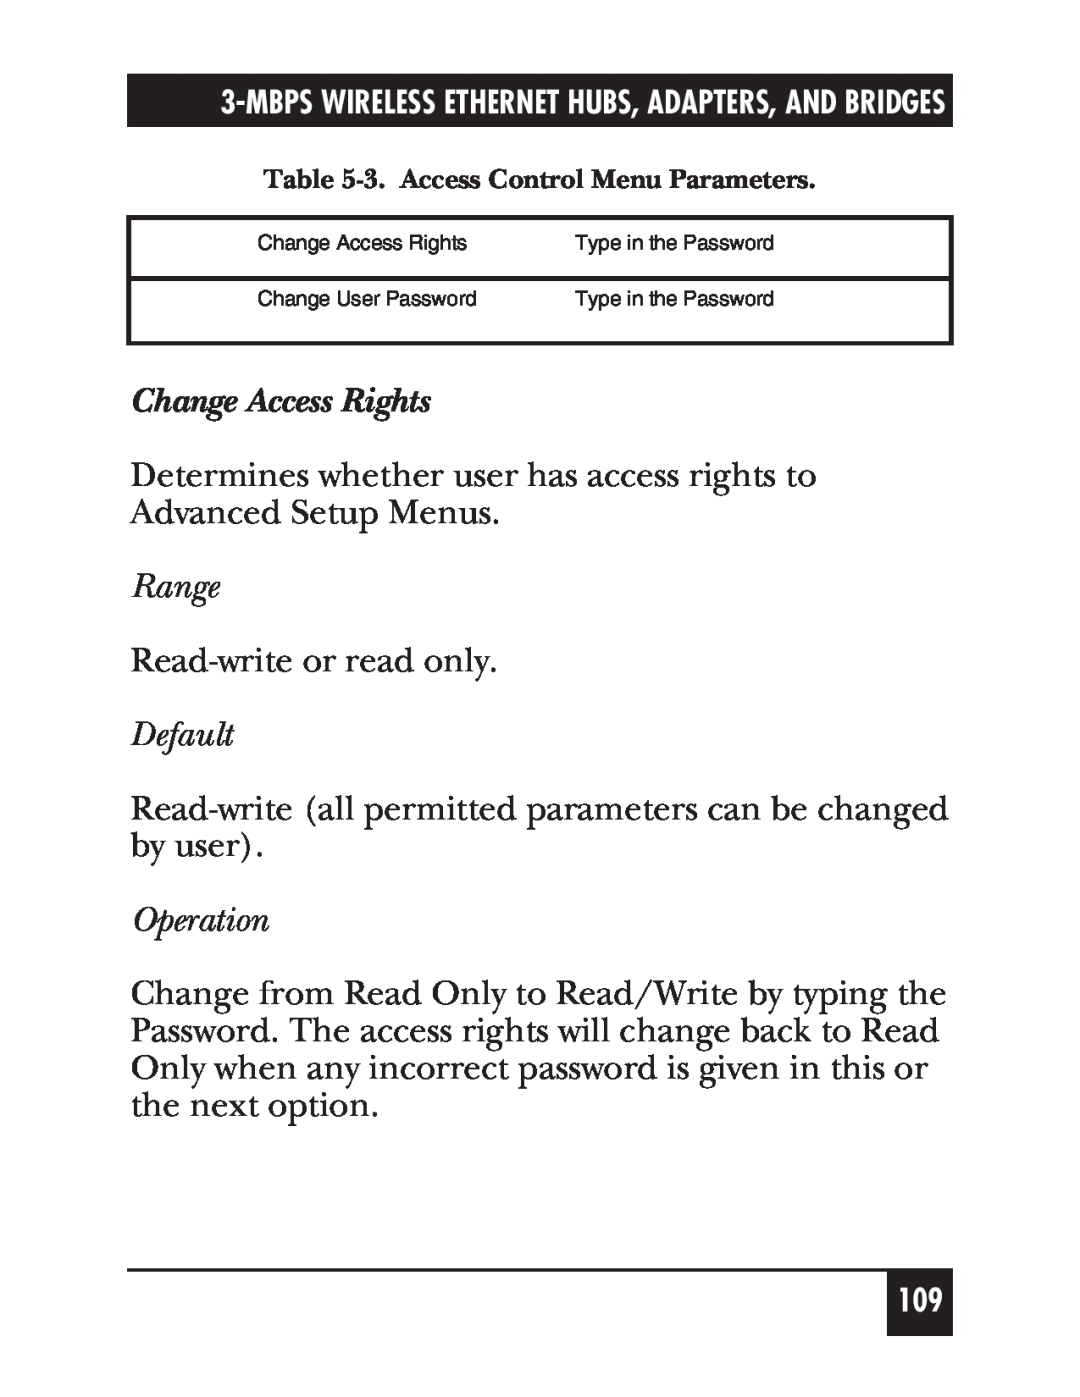 Black Box LW003A, LW012AE, LW011AE, LW008A, LW005A, LW009A, LW002A, LW004A Change Access Rights, Range, Default, Operation 